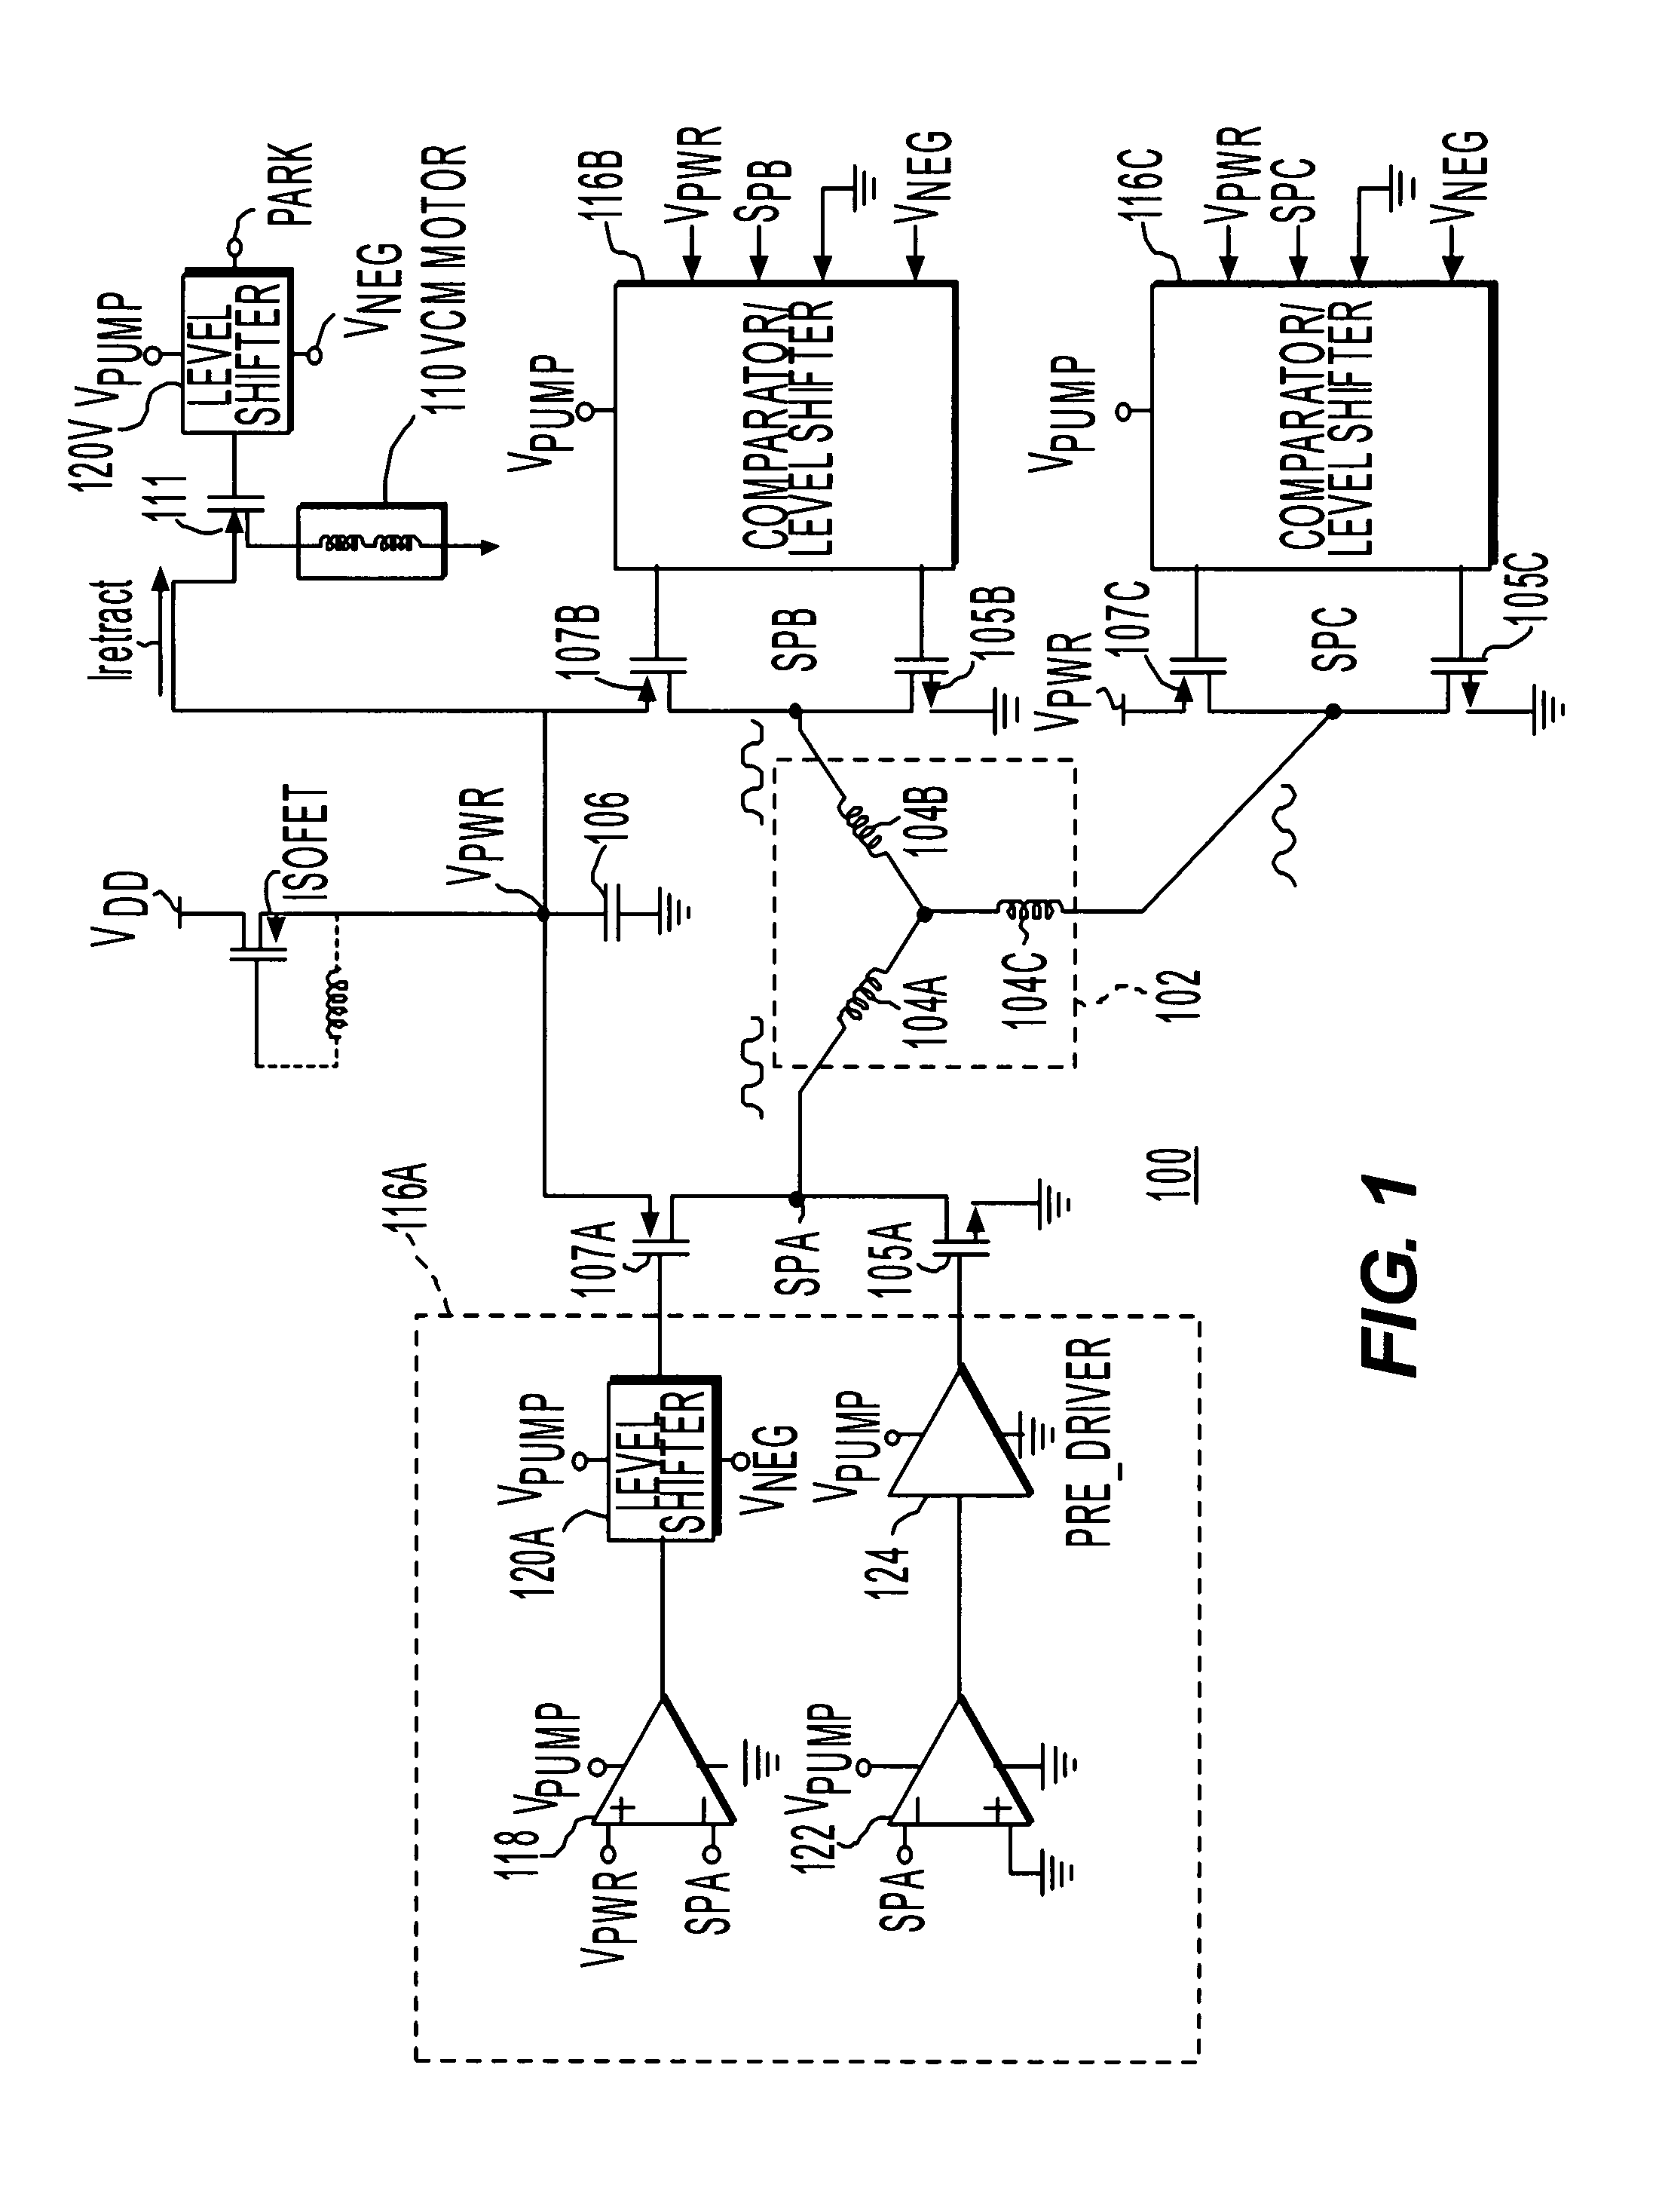 System and process for utilizing back electromotive force in disk drives